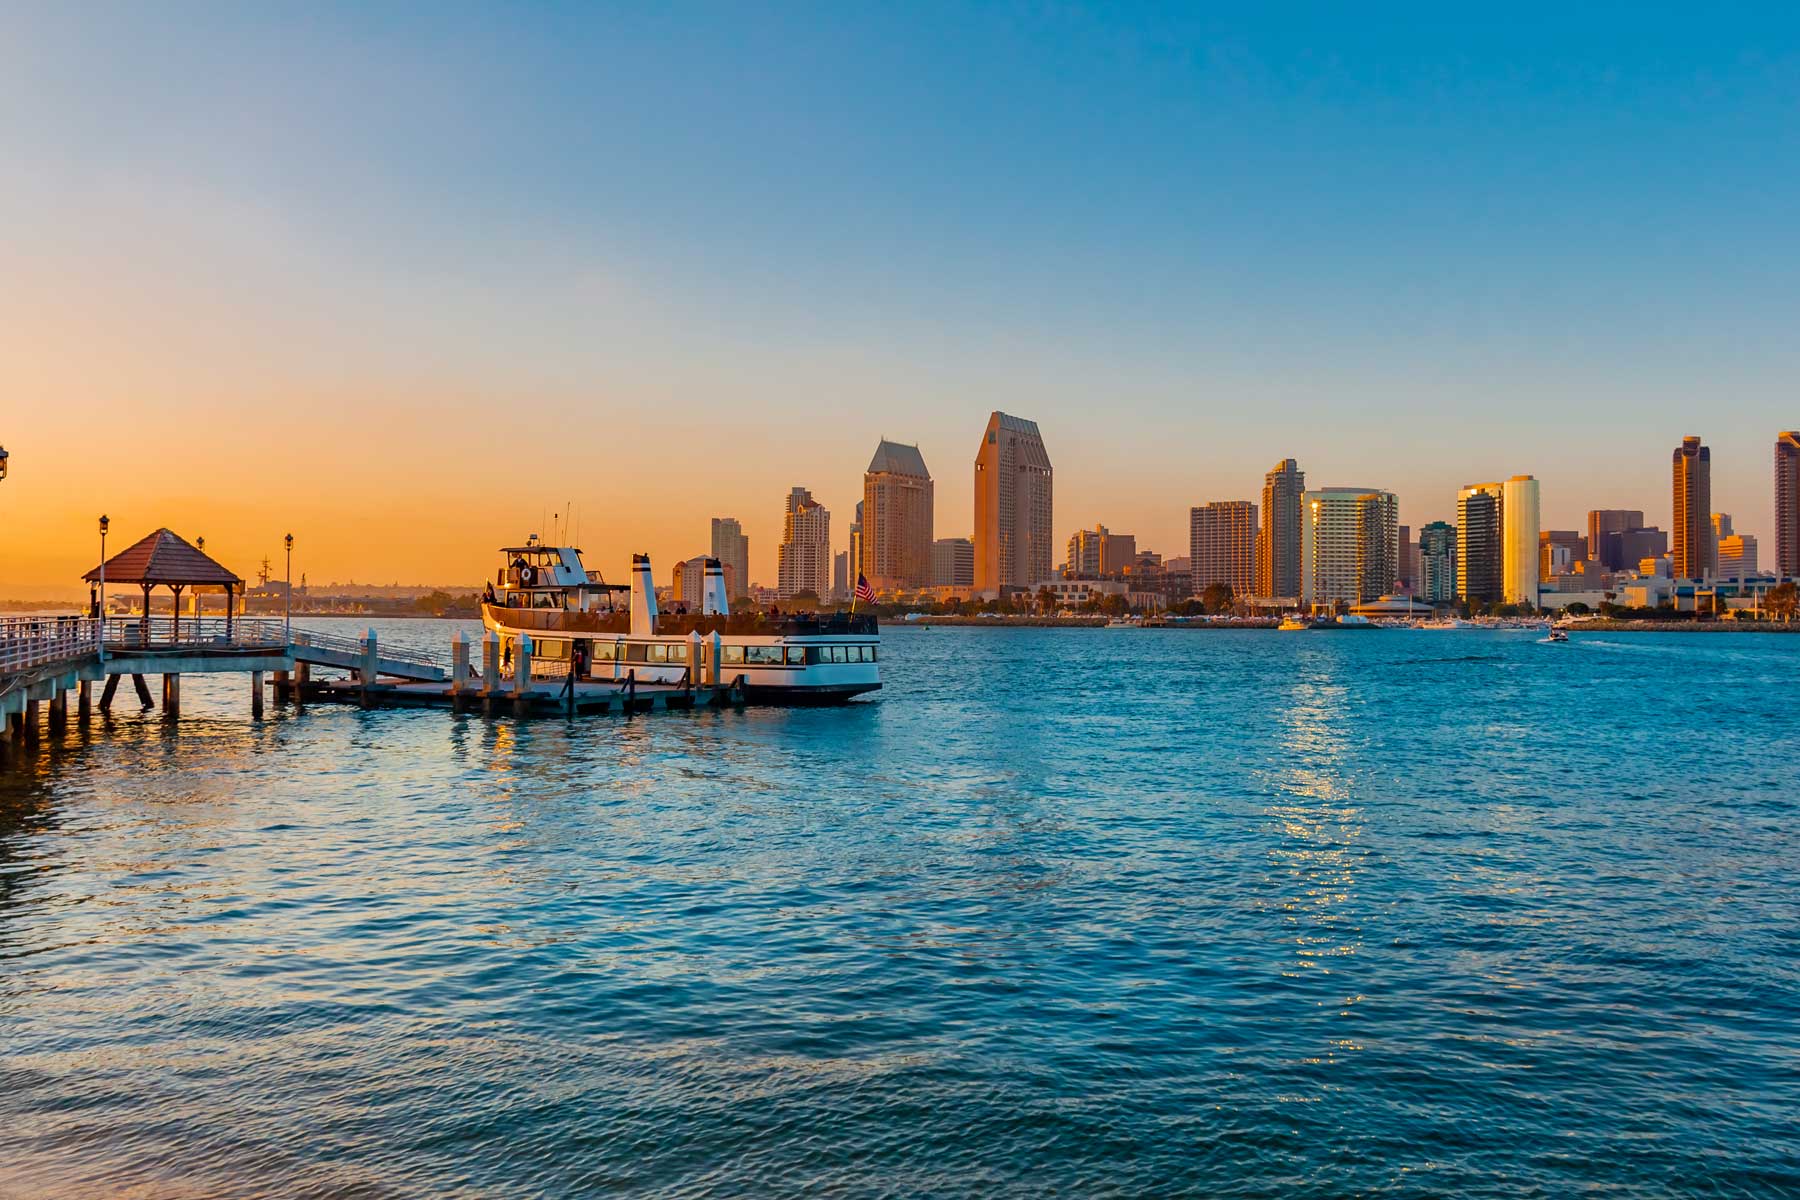 San Diego Bay at dusk with ferry at dock.